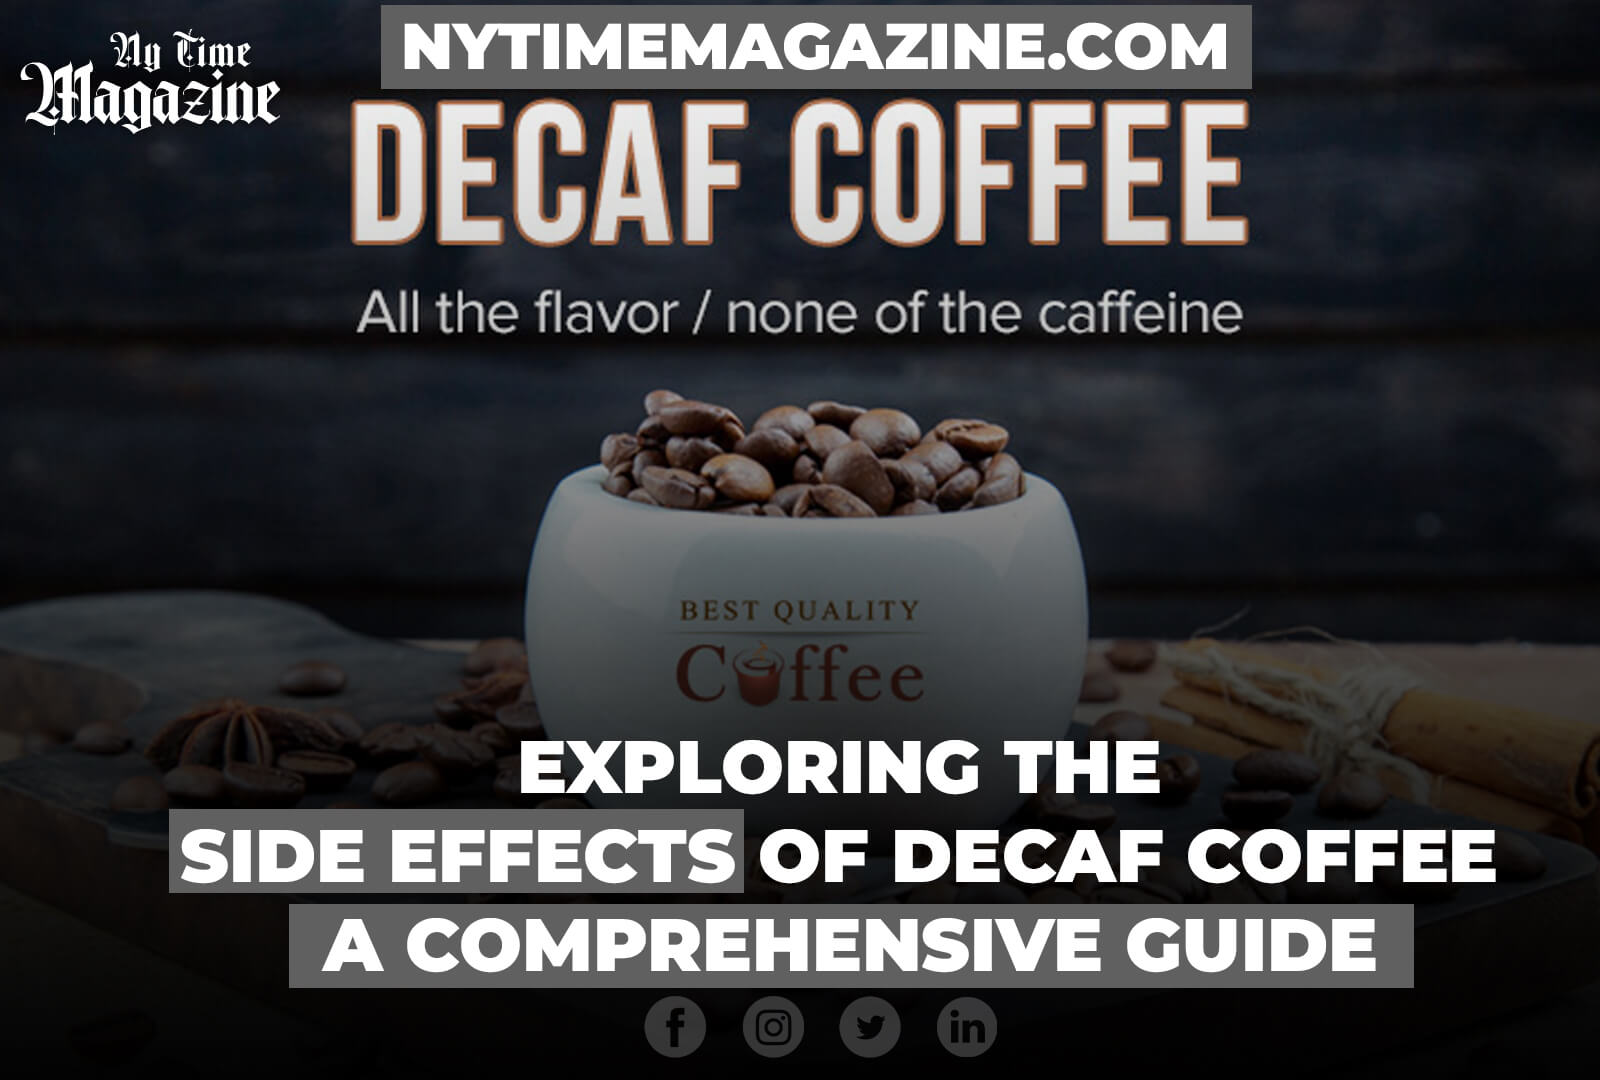 EXPLORING THE SIDE EFFECTS OF DECAF COFFEE: A COMPREHENSIVE GUIDE